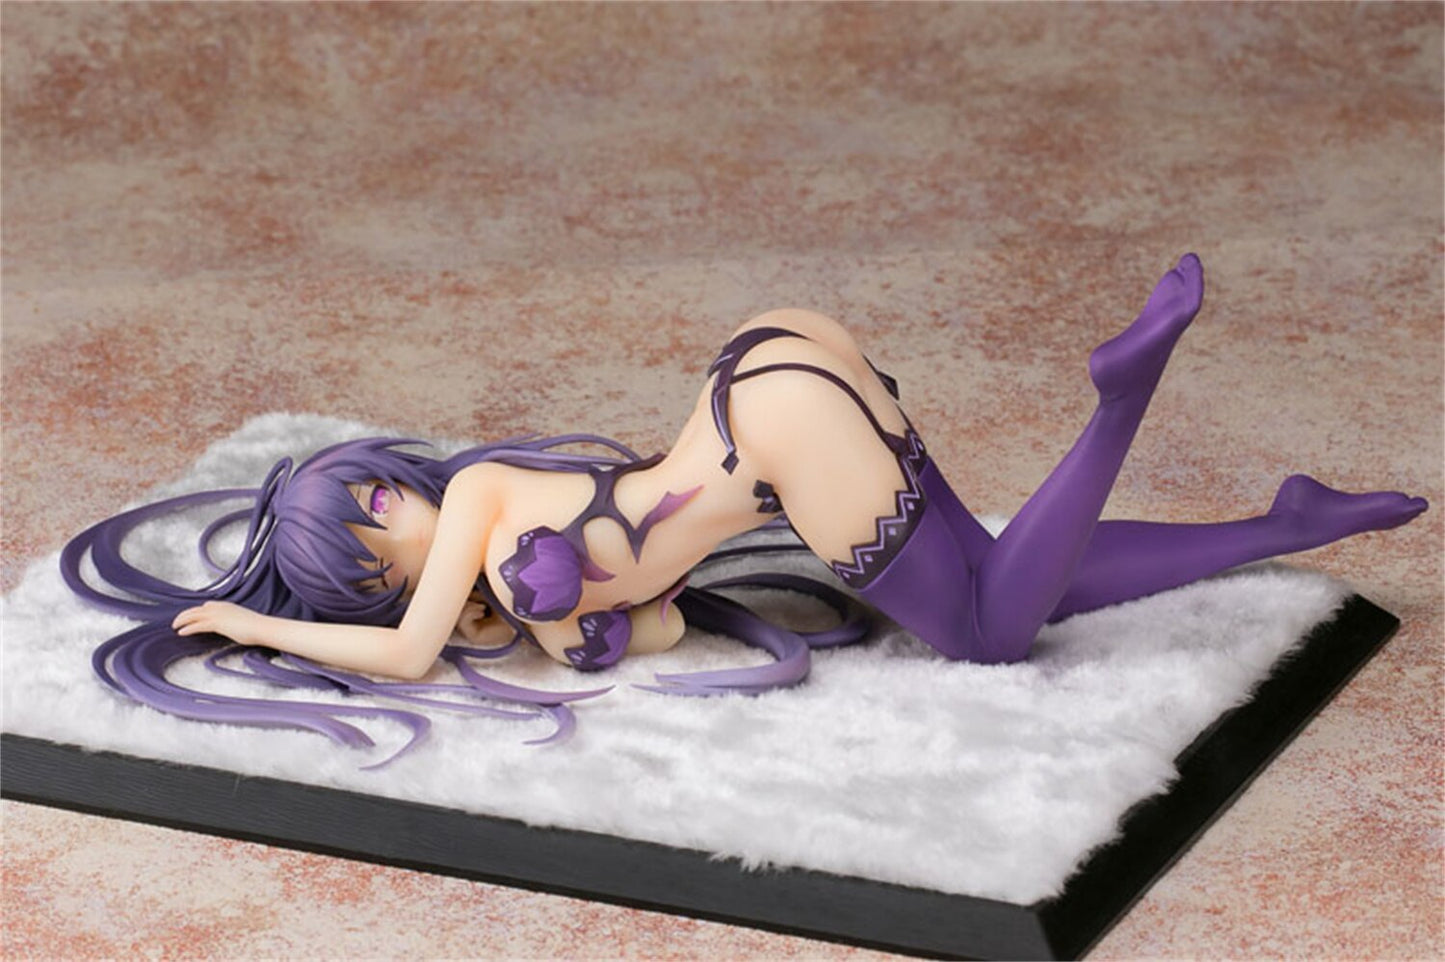 26cm Date A Live Yatogami Tohka 1/6 PVC Action Figure Sexy Cut Girl Anime Toy Hentai Model Dolls Collection Gift Toys